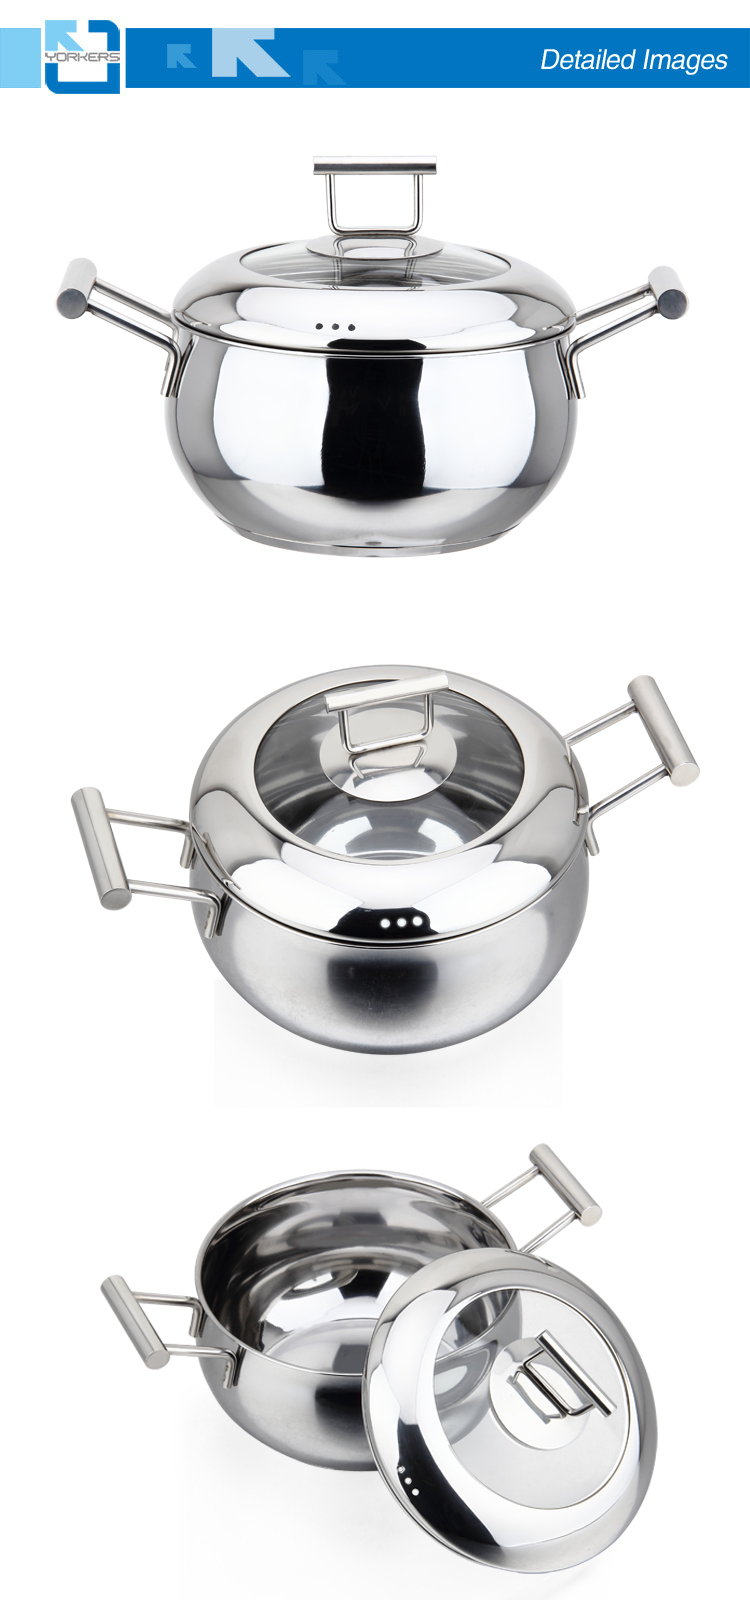 New Design Stock Pot Stainless Steel Ware Soup Pot